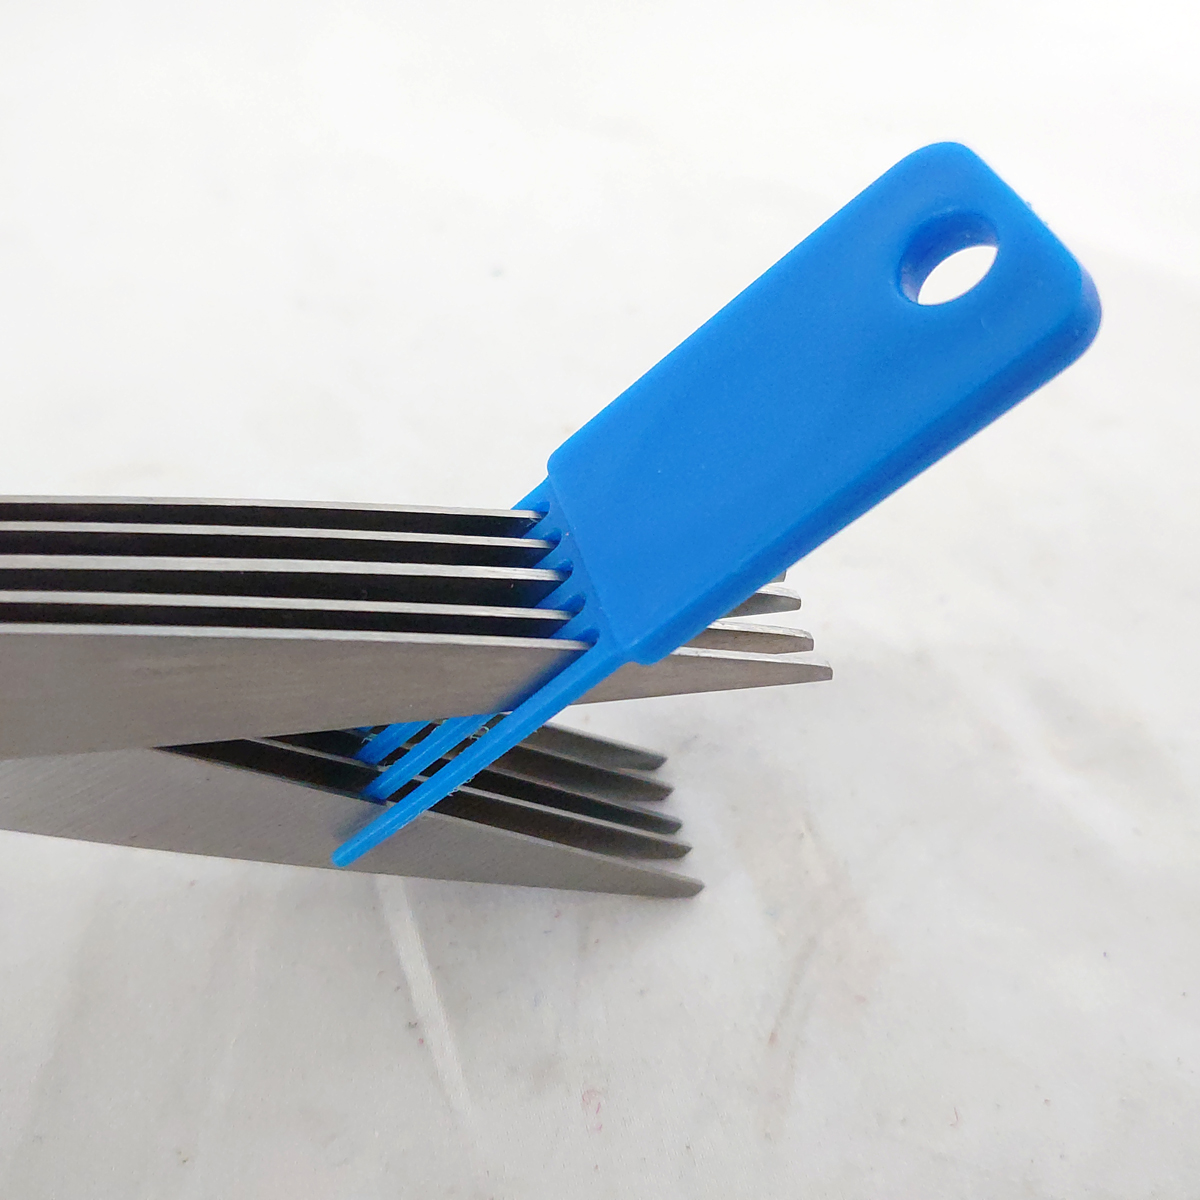 DSA-HCS Herb Shears Cleaning Comb Image